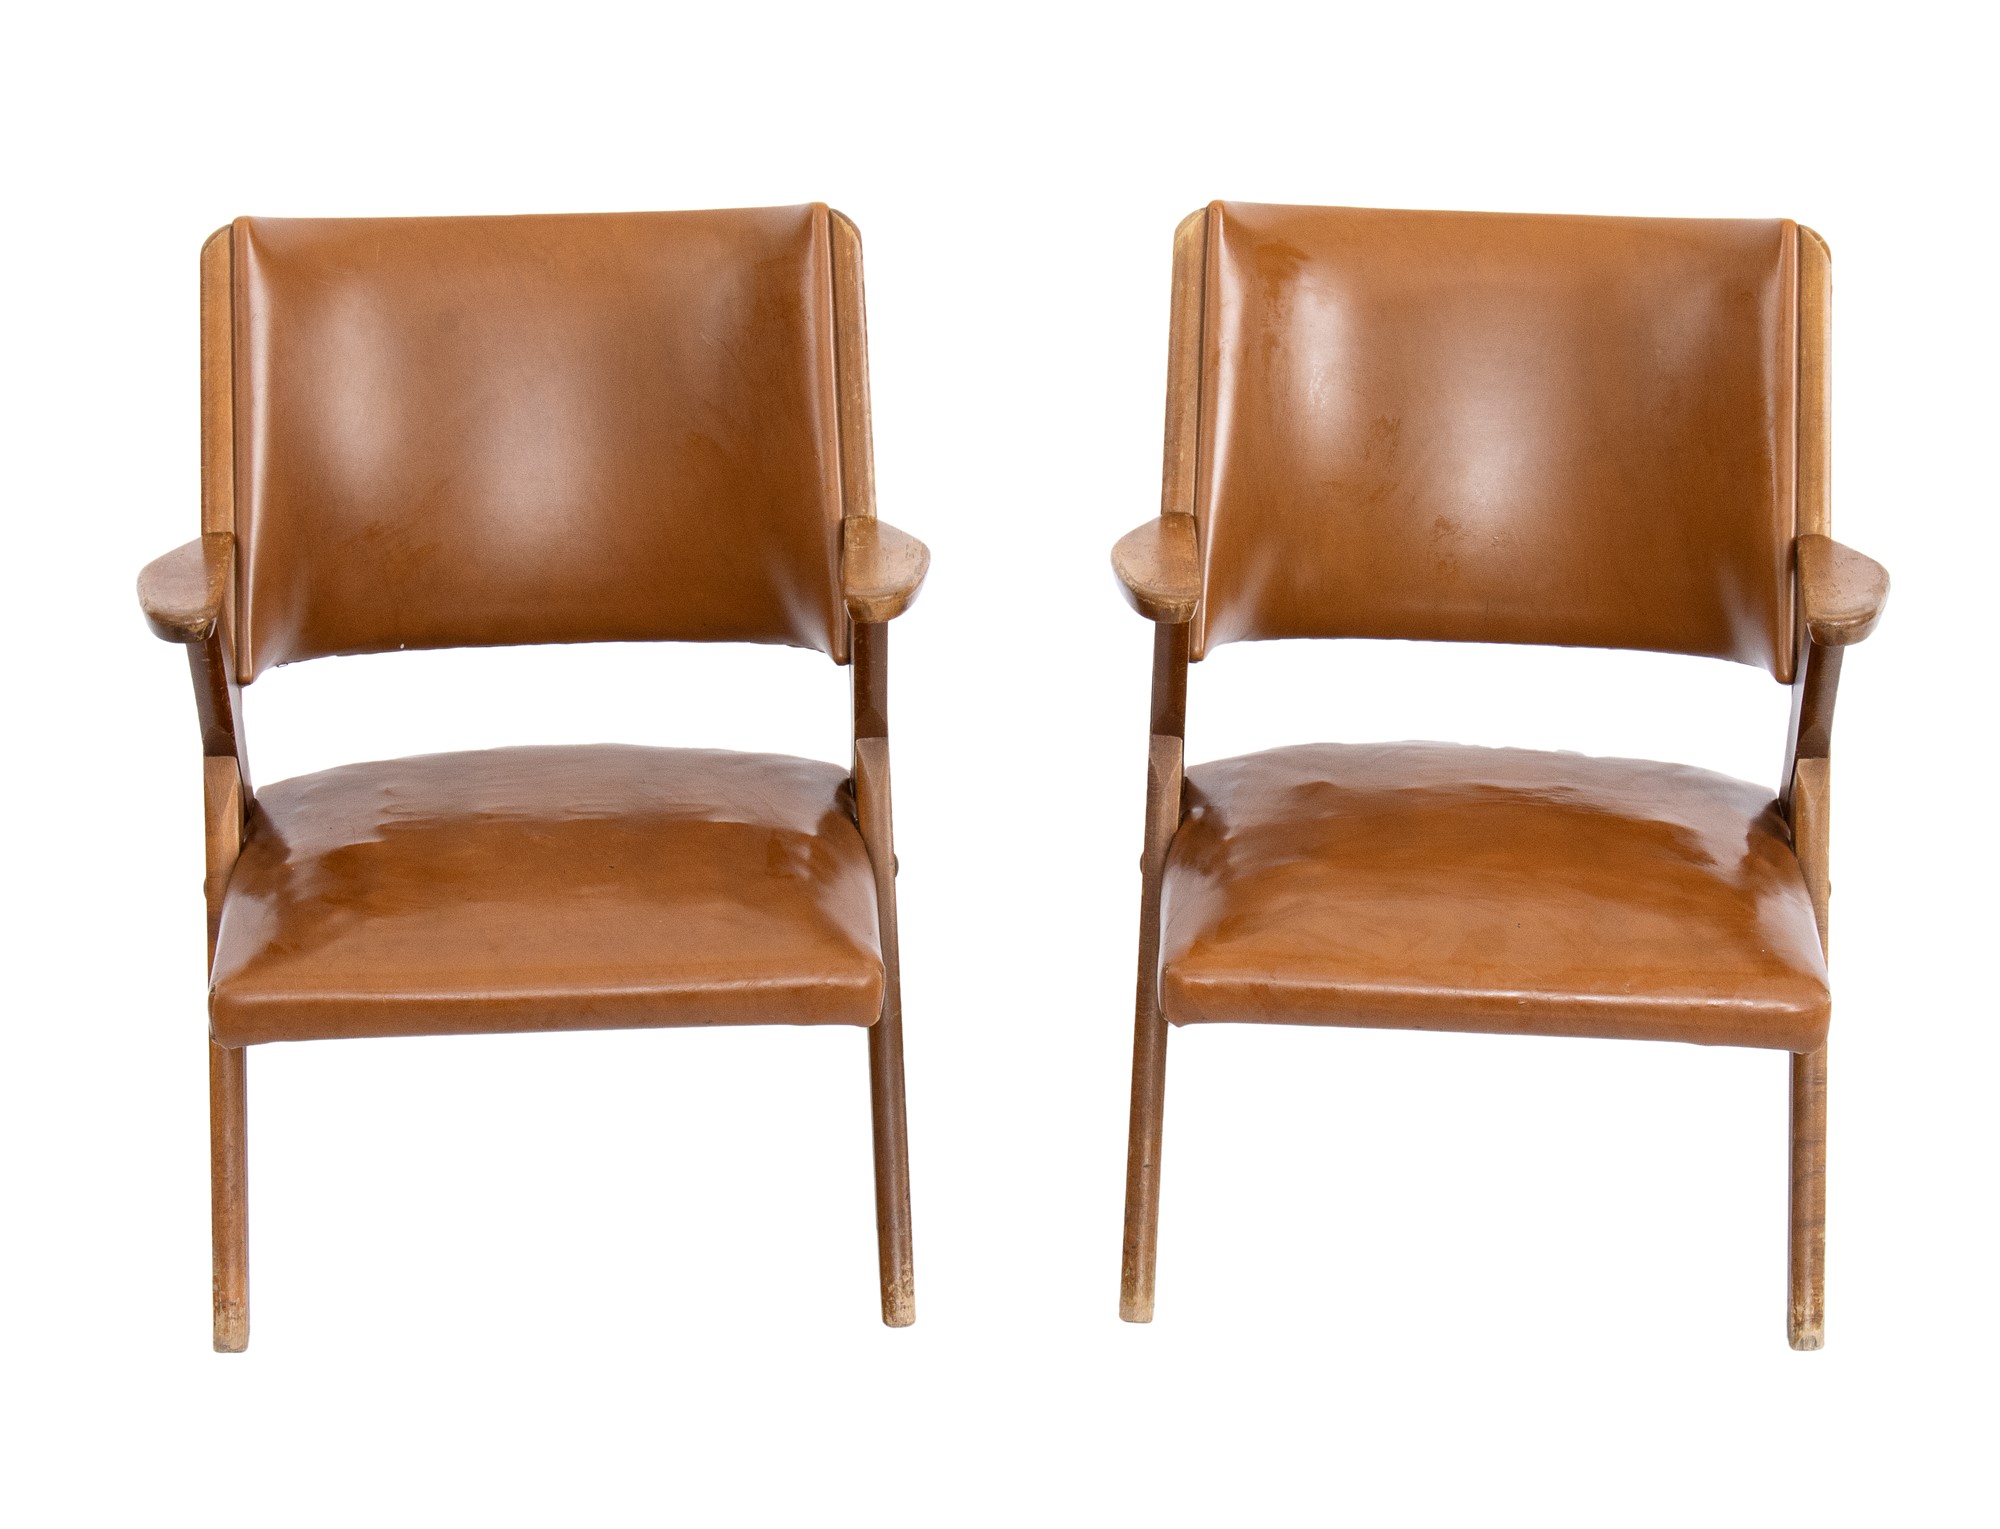 Dal Vera pair of armchairs with upholstered leather seats and backs - Image 7 of 17